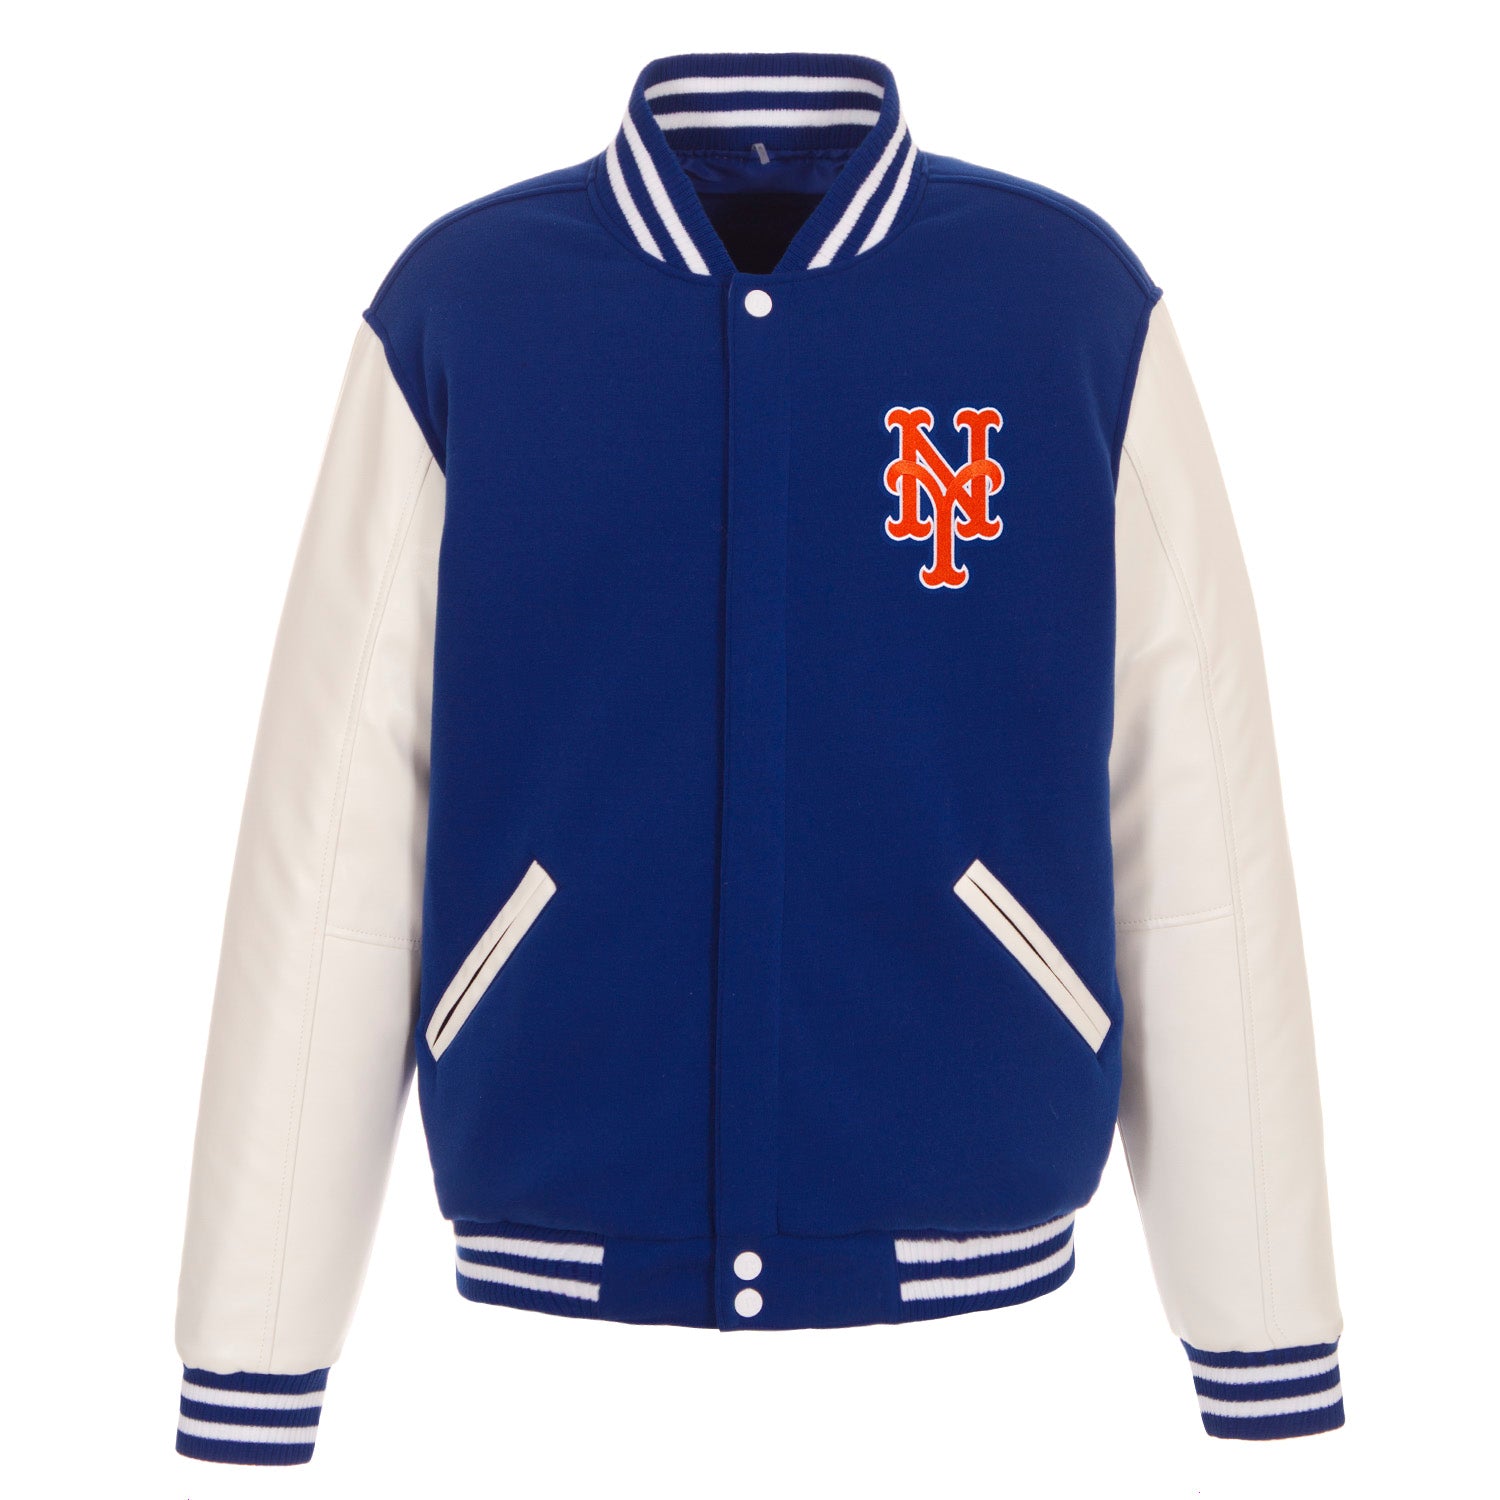 New York Mets JH Design Reversible Fleece Jacket with Faux Leather Sleeves - Royal